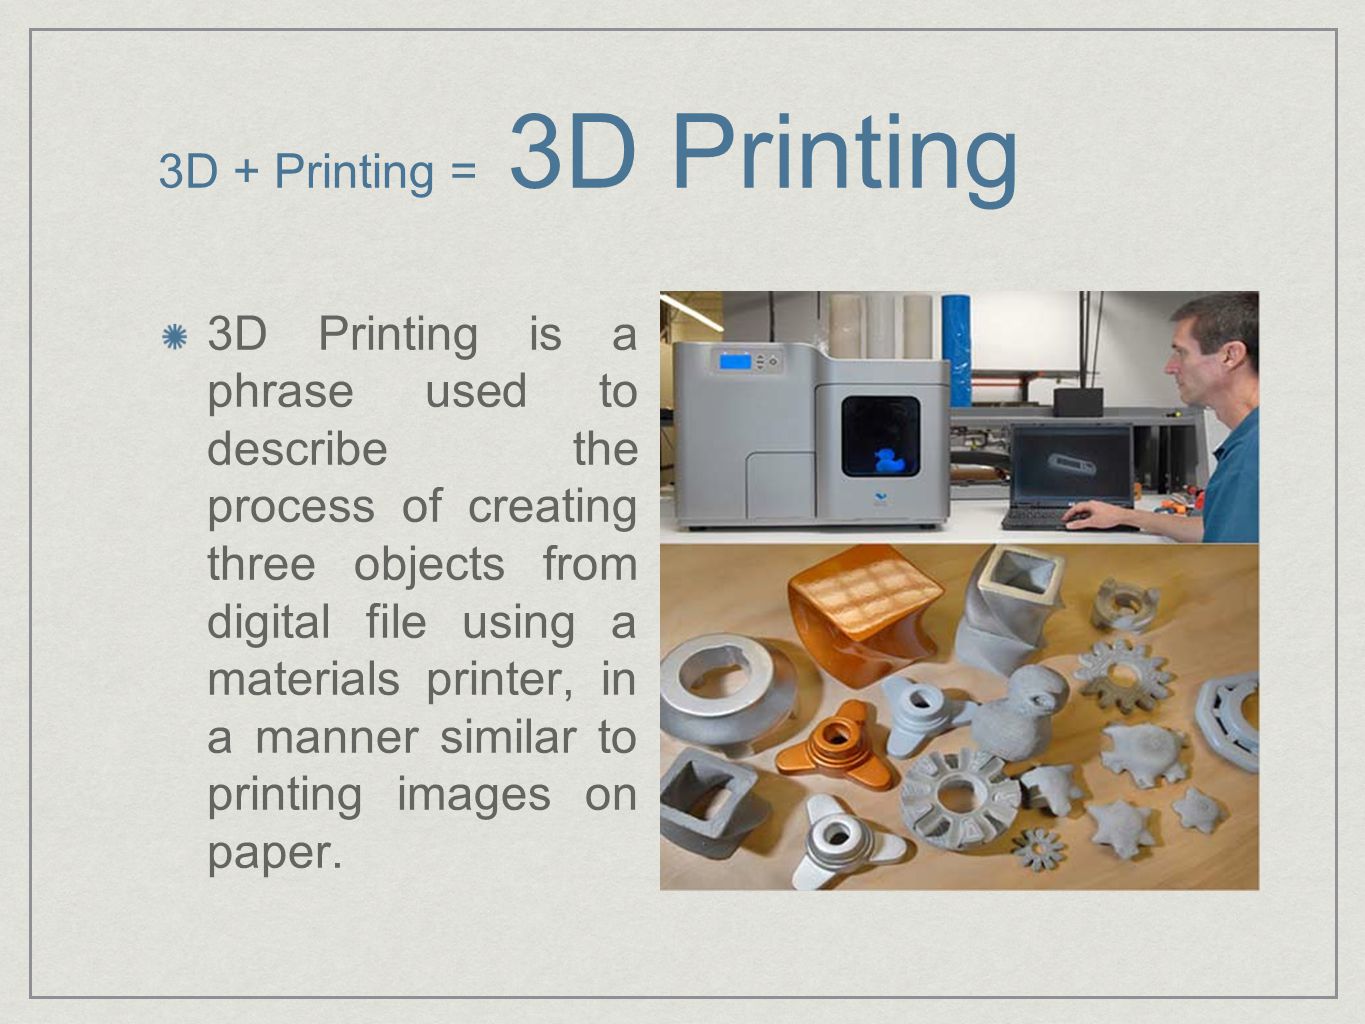 3D + Printing = 3D Printing 3D Printing is a phrase used to describe the process of creating three objects from digital file using a materials printer, in a manner similar to printing images on paper.